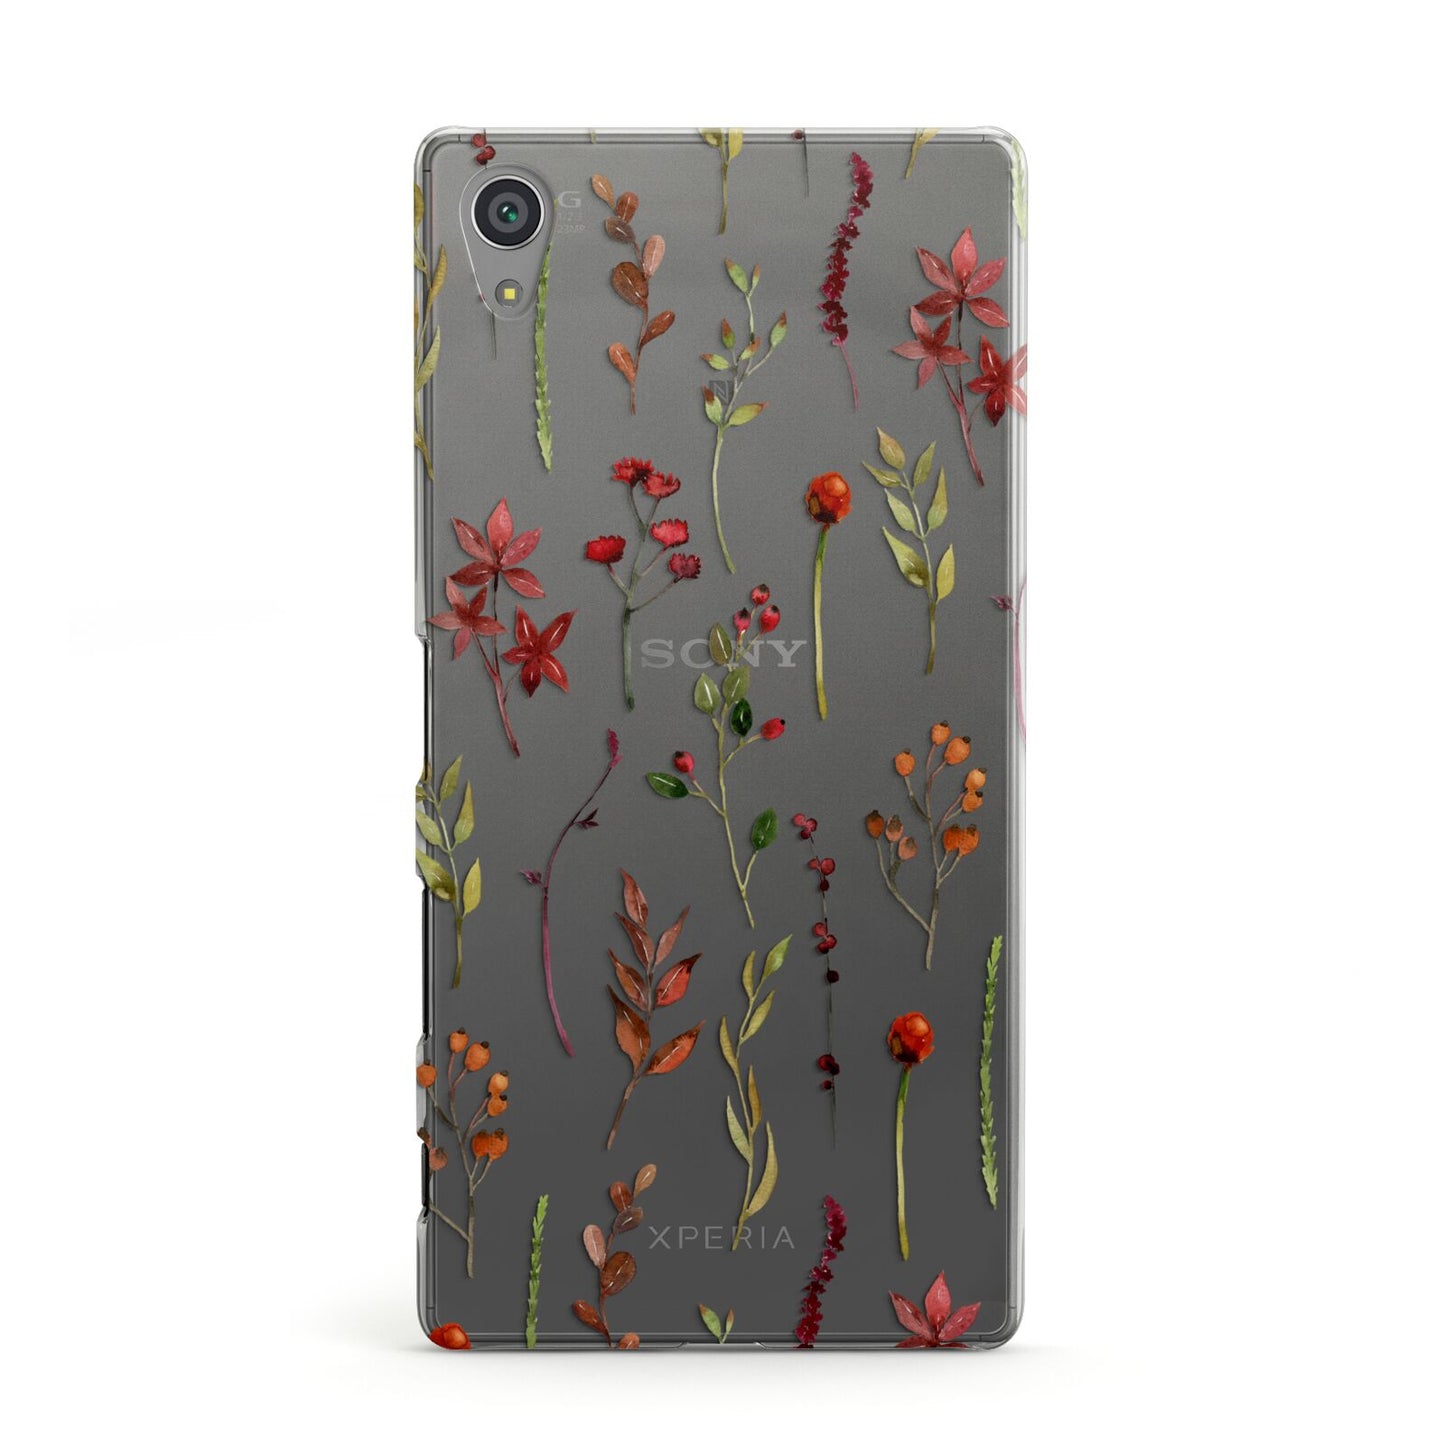 Watercolour Flowers and Foliage Sony Xperia Case